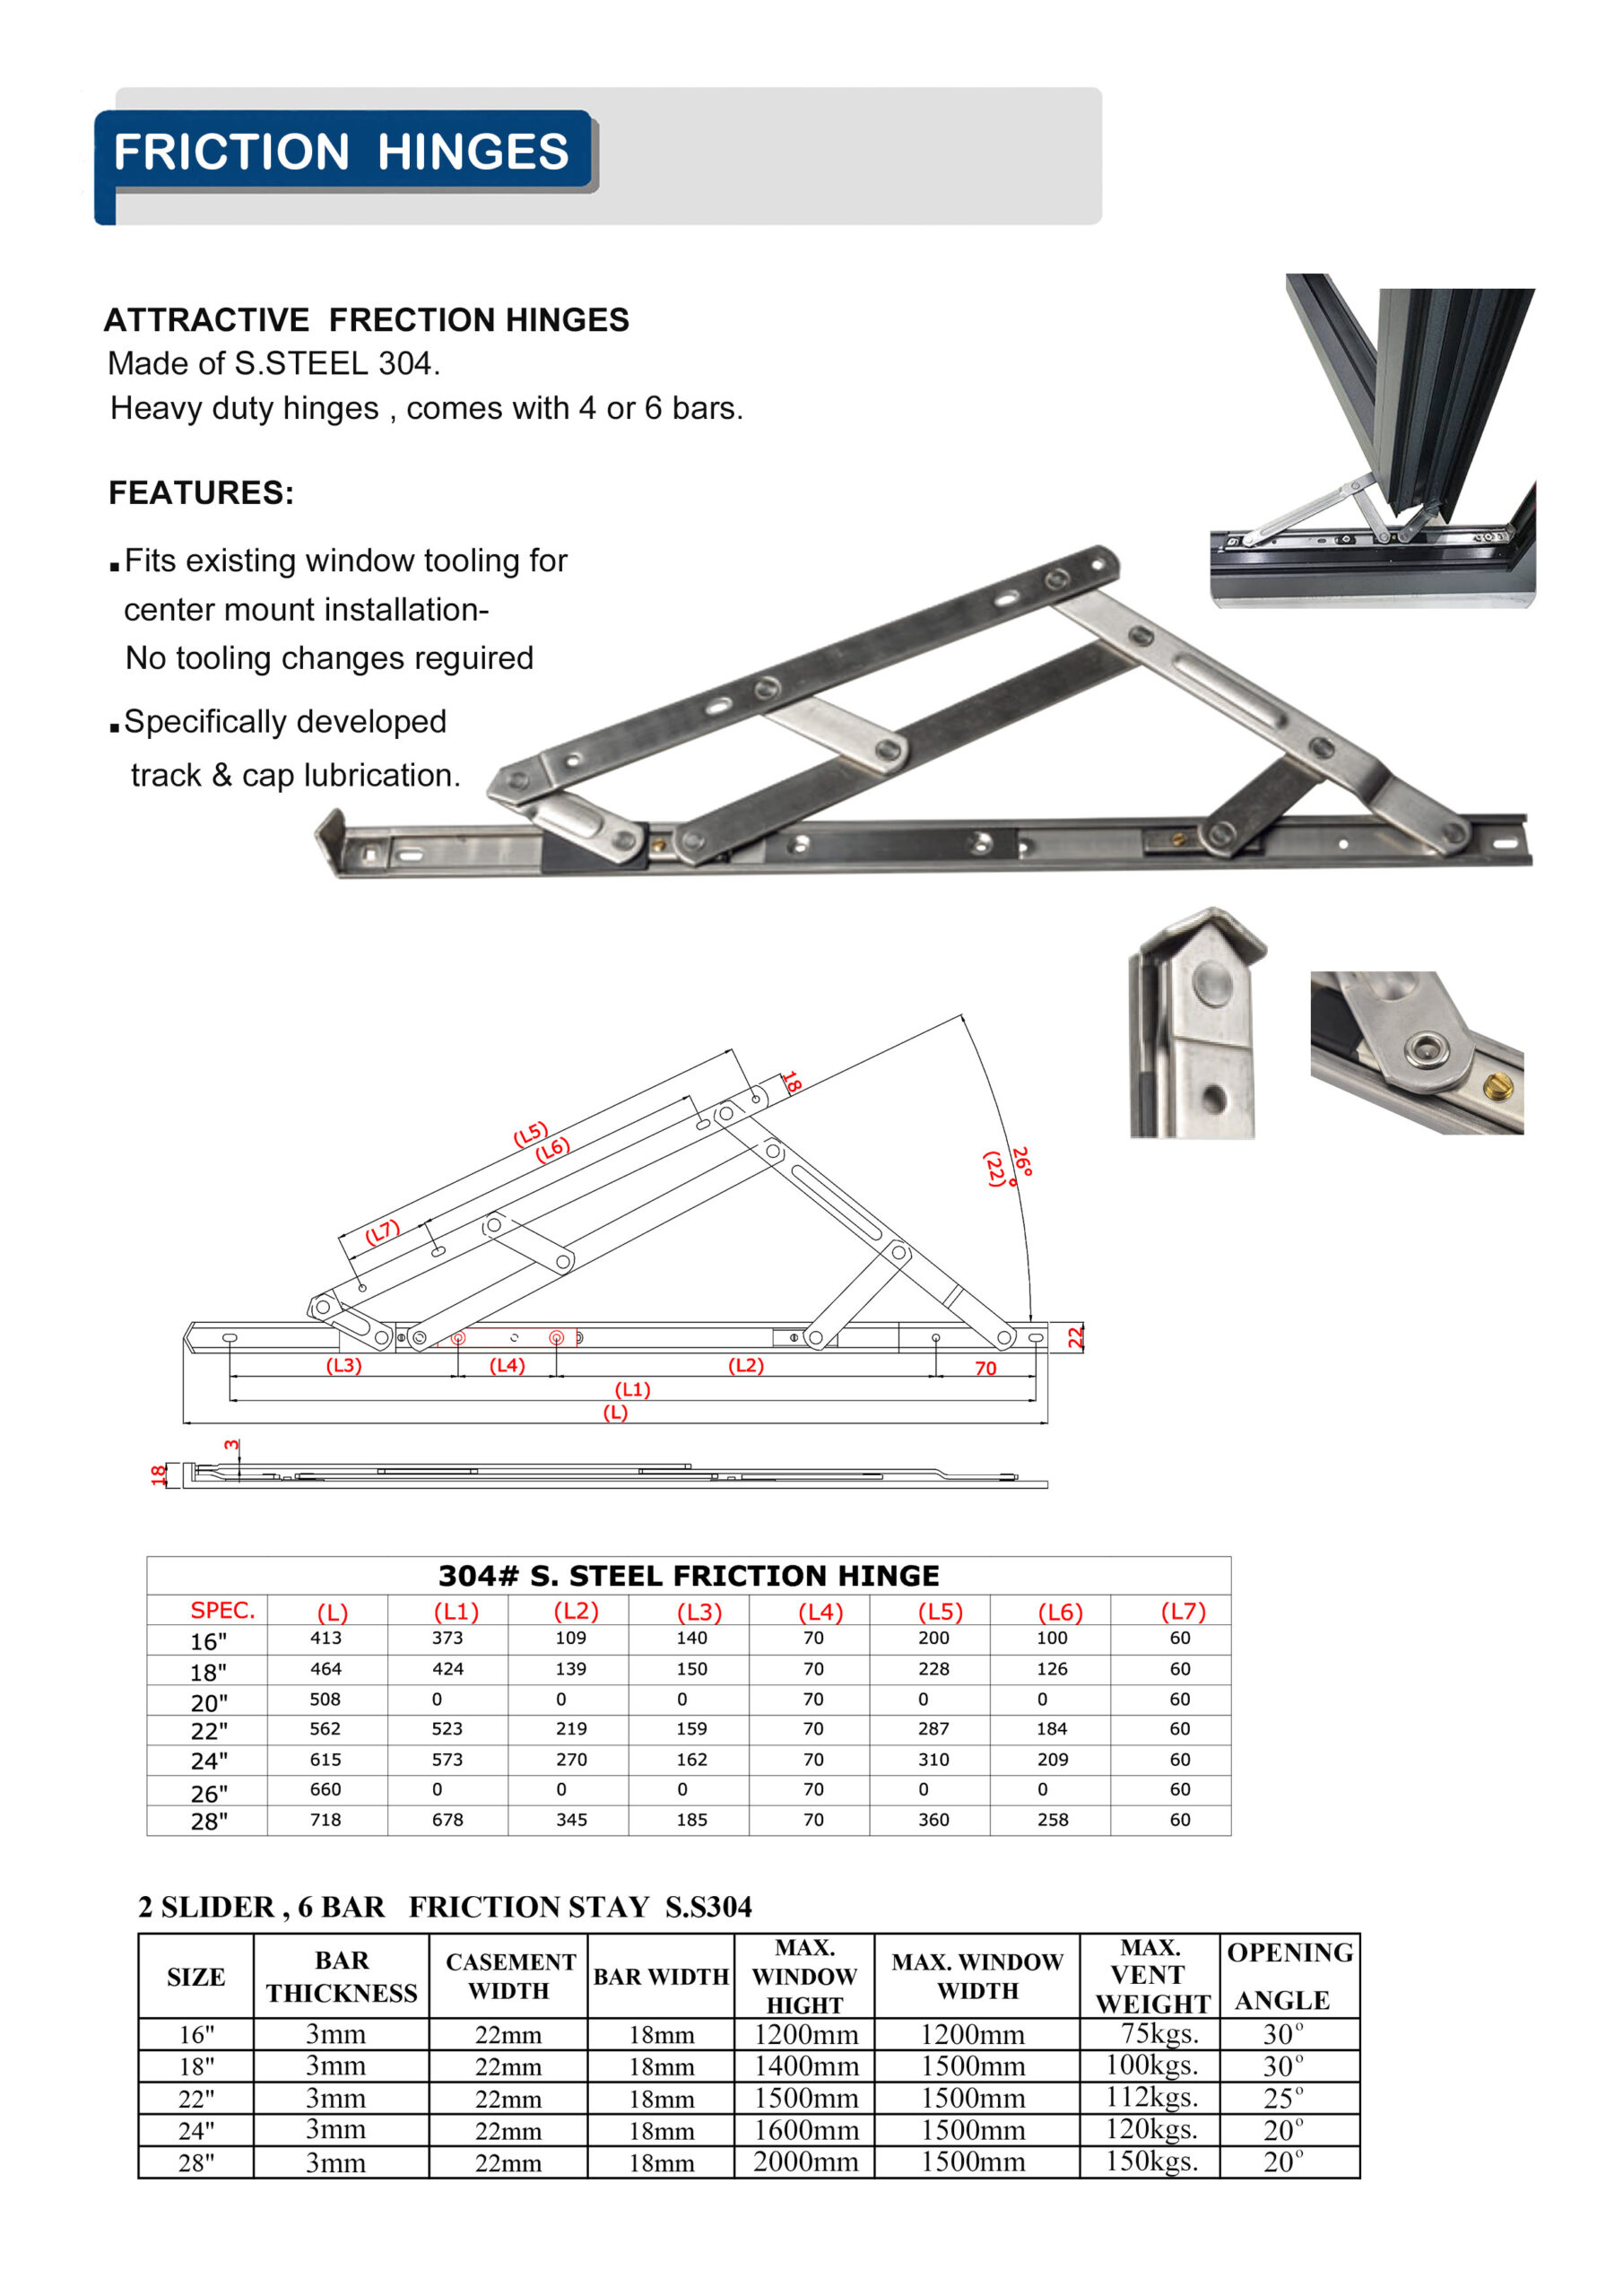 FRICTION-HINGES info